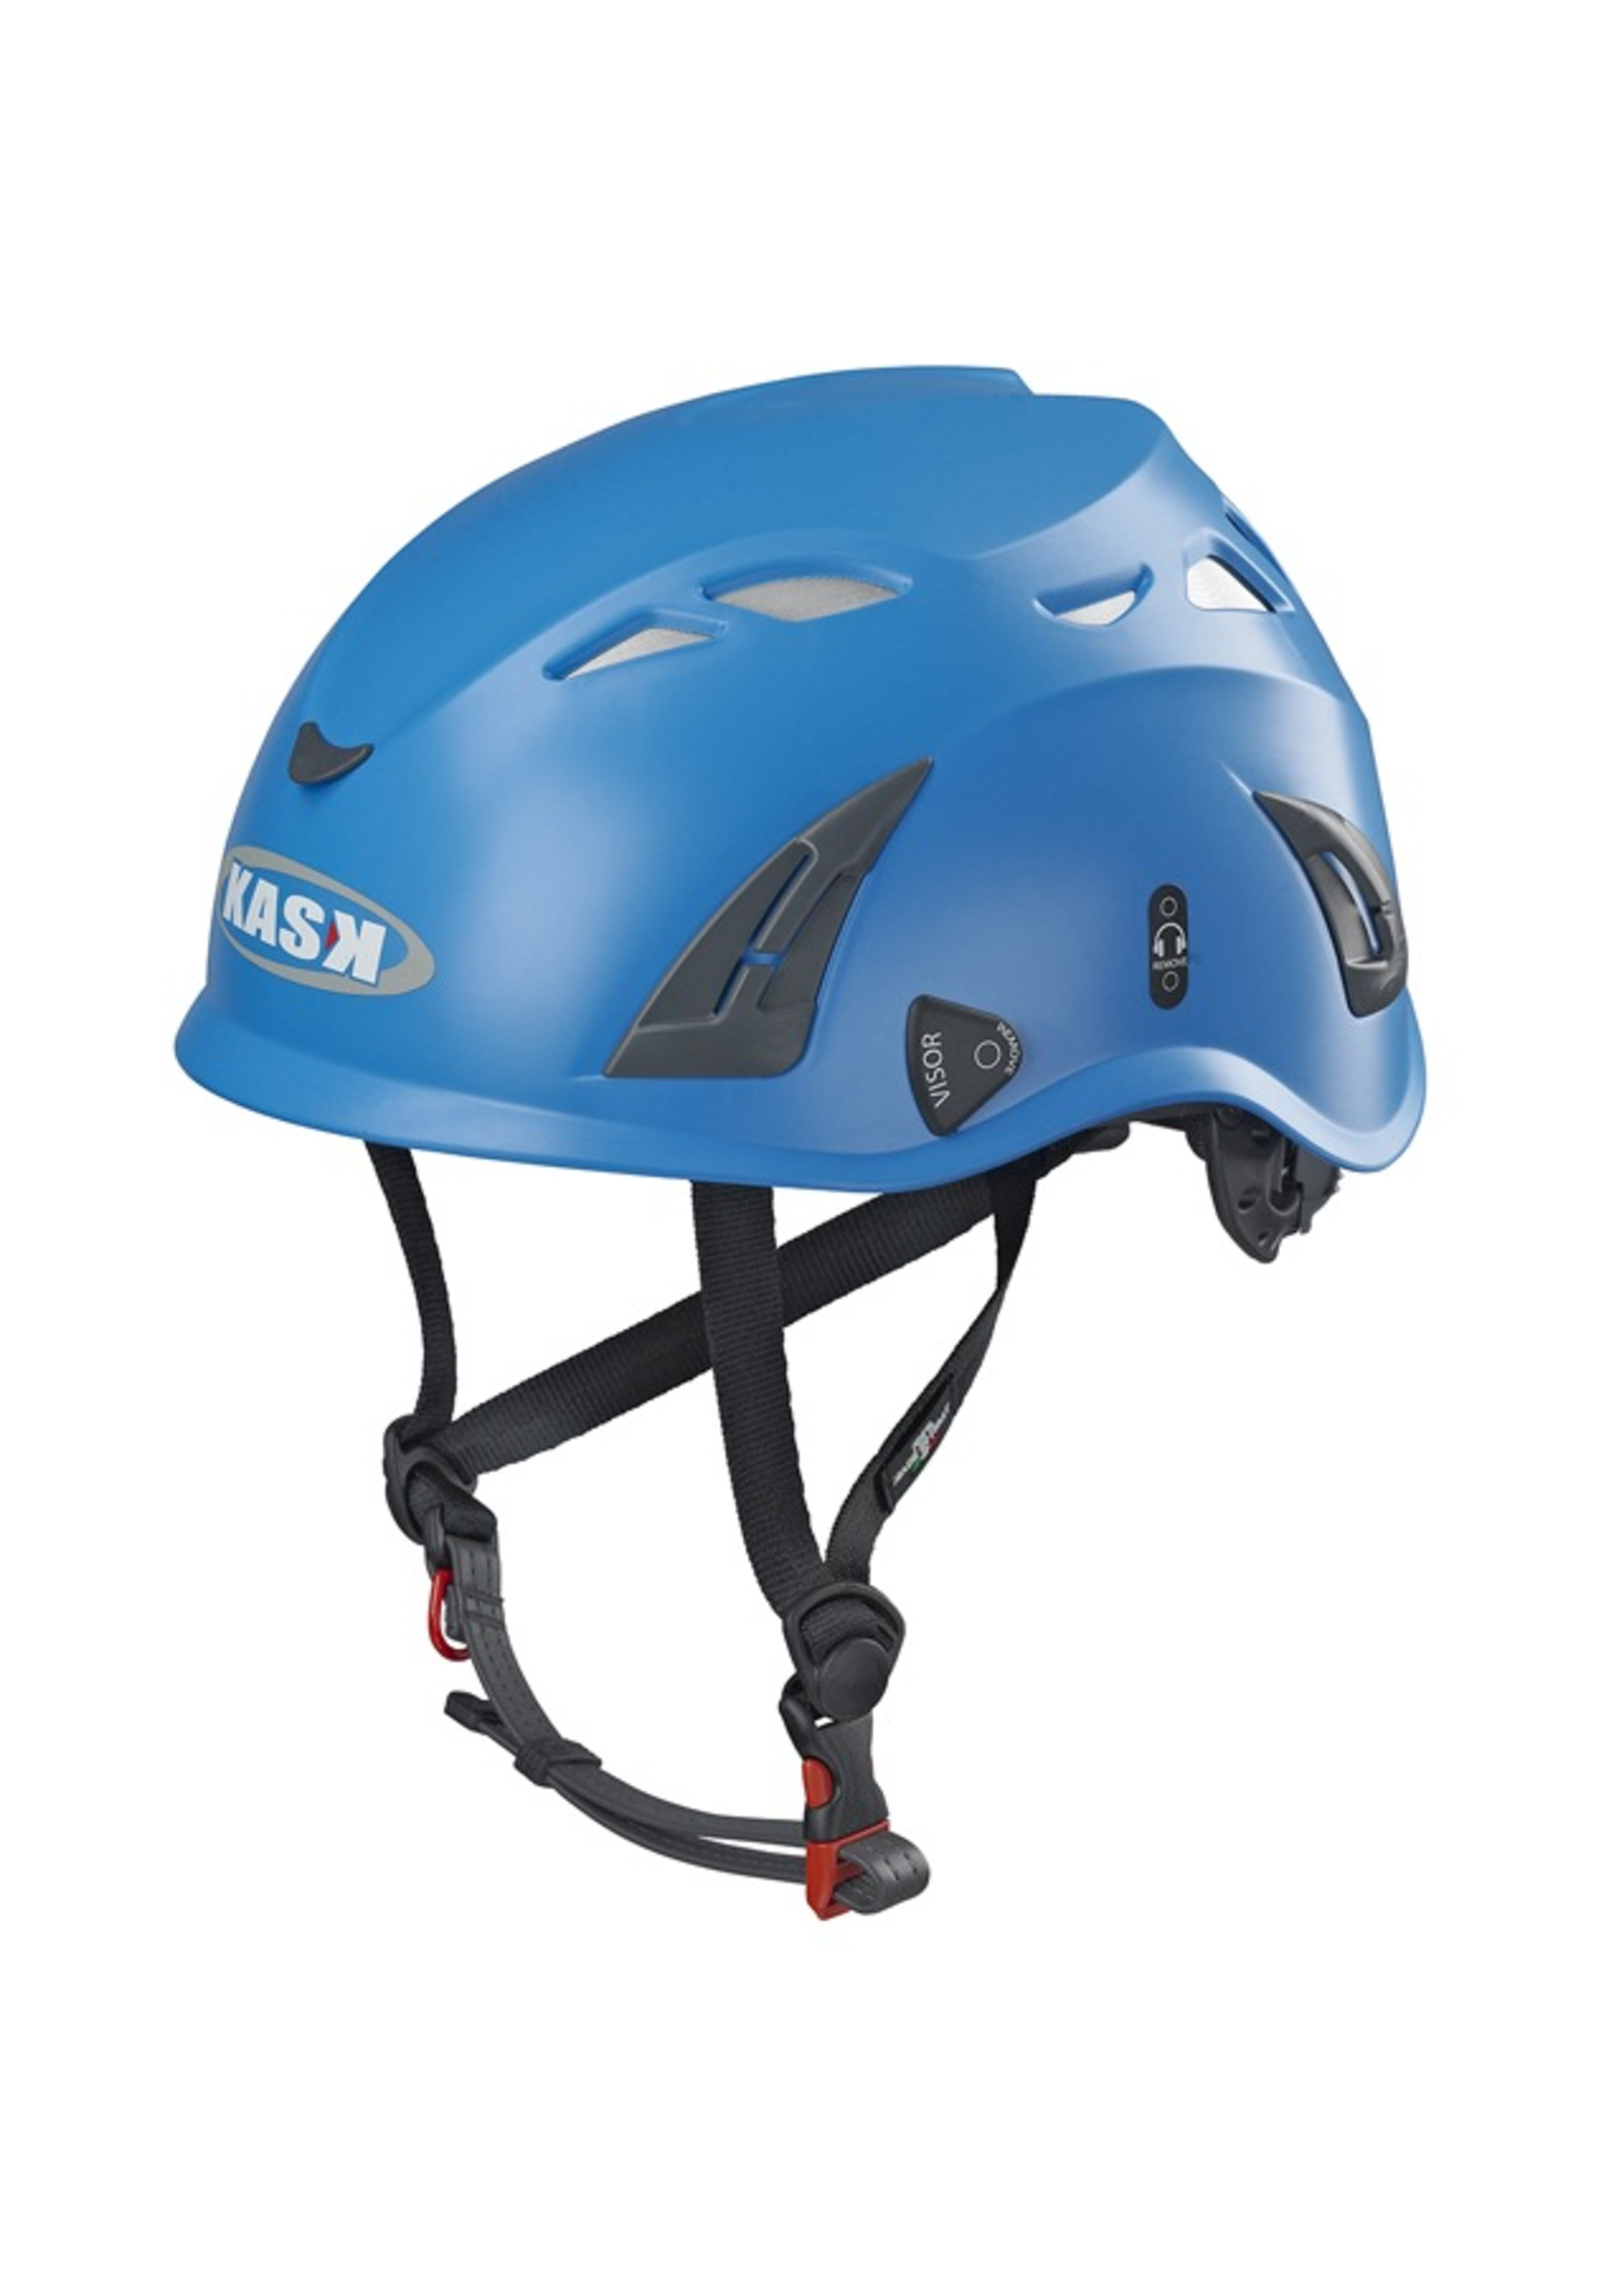 KASK Blue Kask Plasma Work with Adapter For Ear Defenders